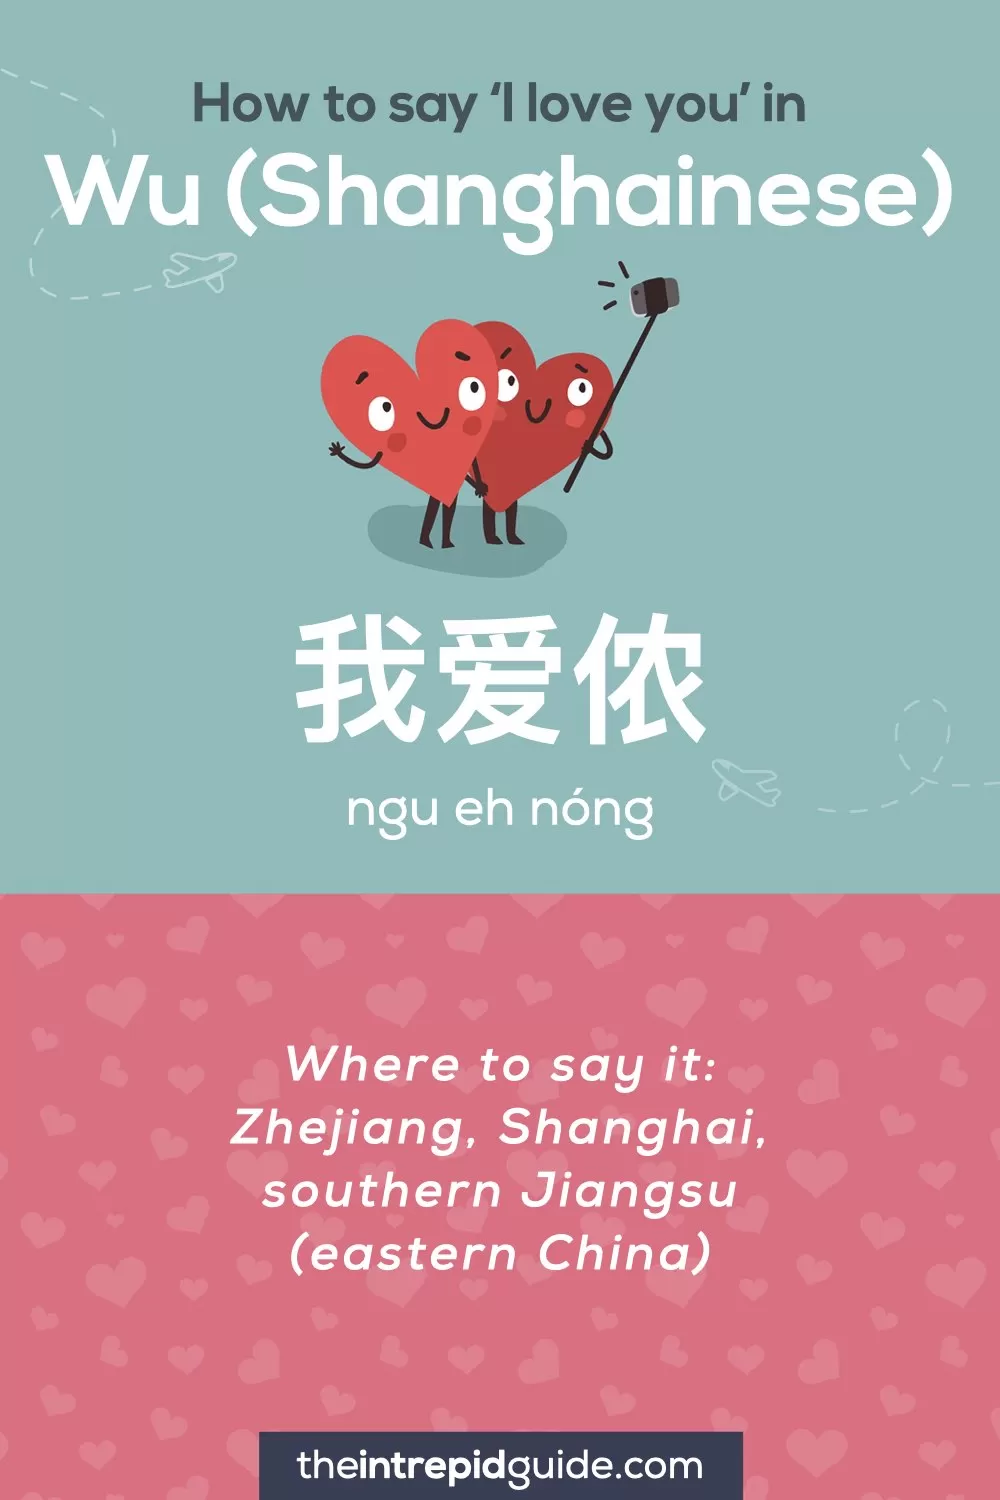 How to say I love you in different languages - Wu - Shanghainese - 我爱侬